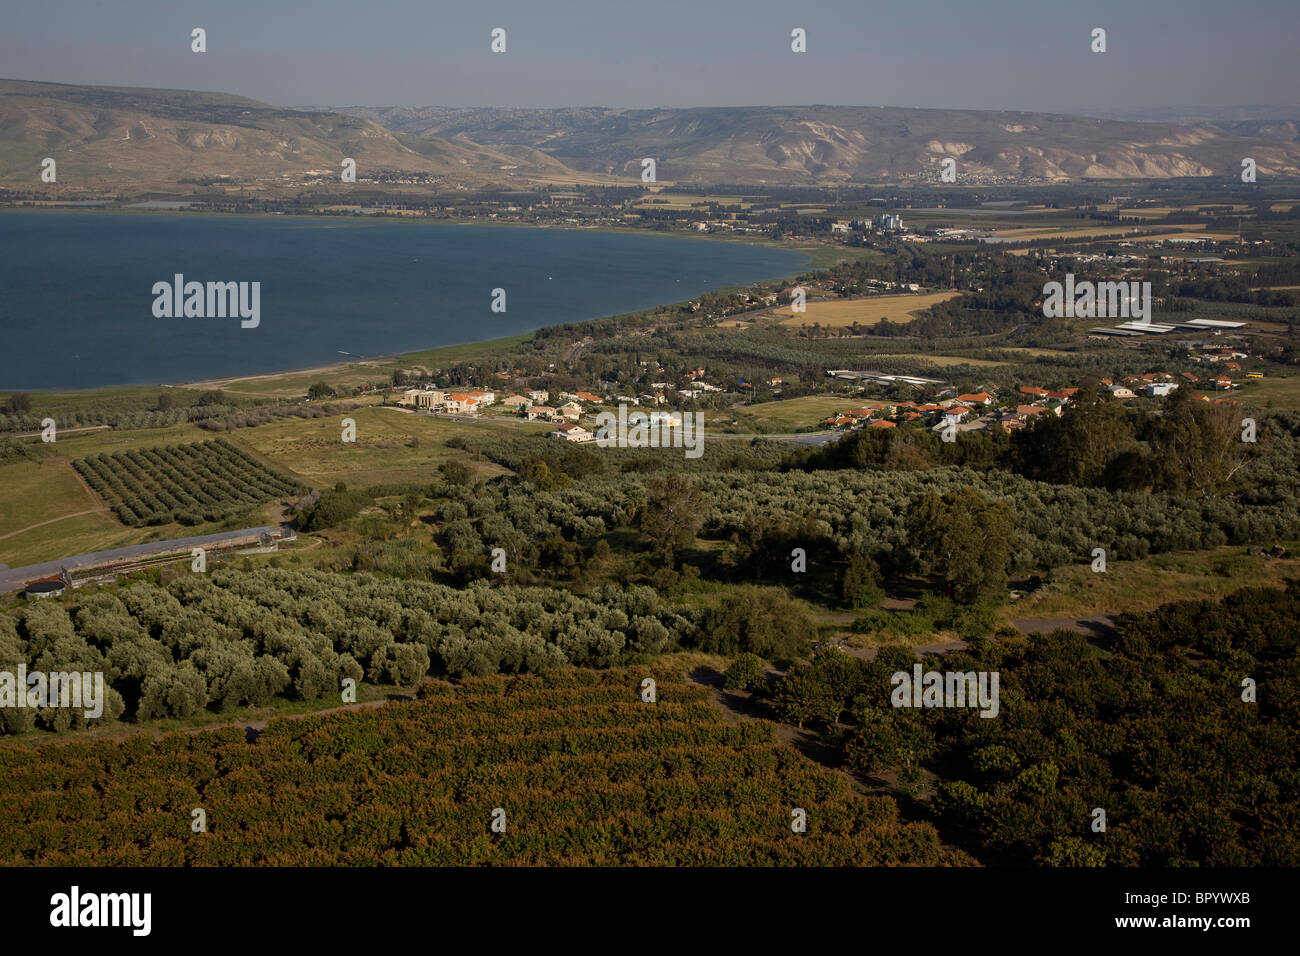 Aerial photograph of the Sea of Galilee Stock Photo